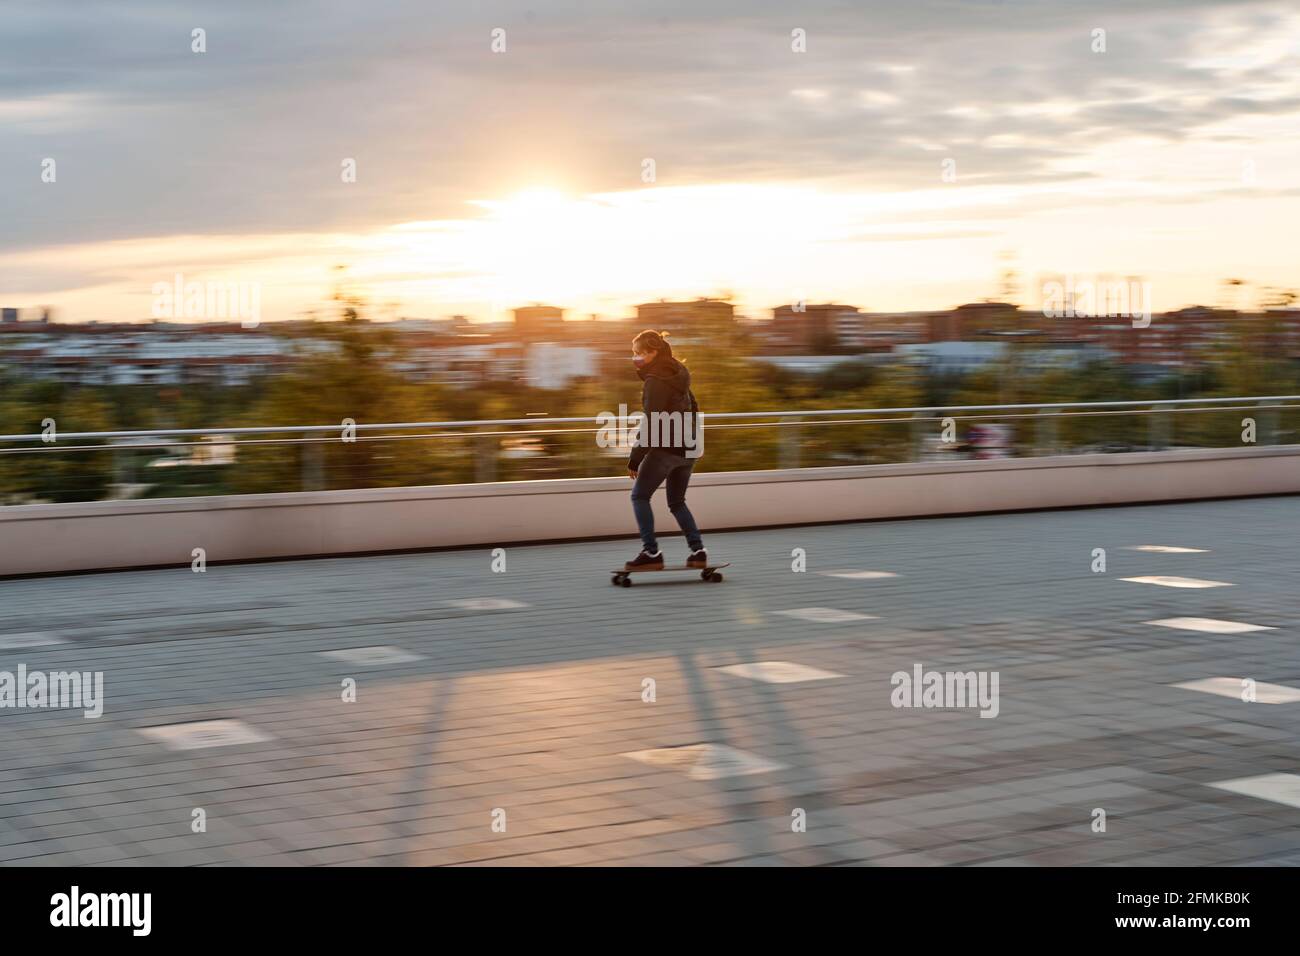 Young girl riding a skateboard in the city. Picture taken by means of a photographic panning, with blurred background. Concept of sustainable transpor Stock Photo